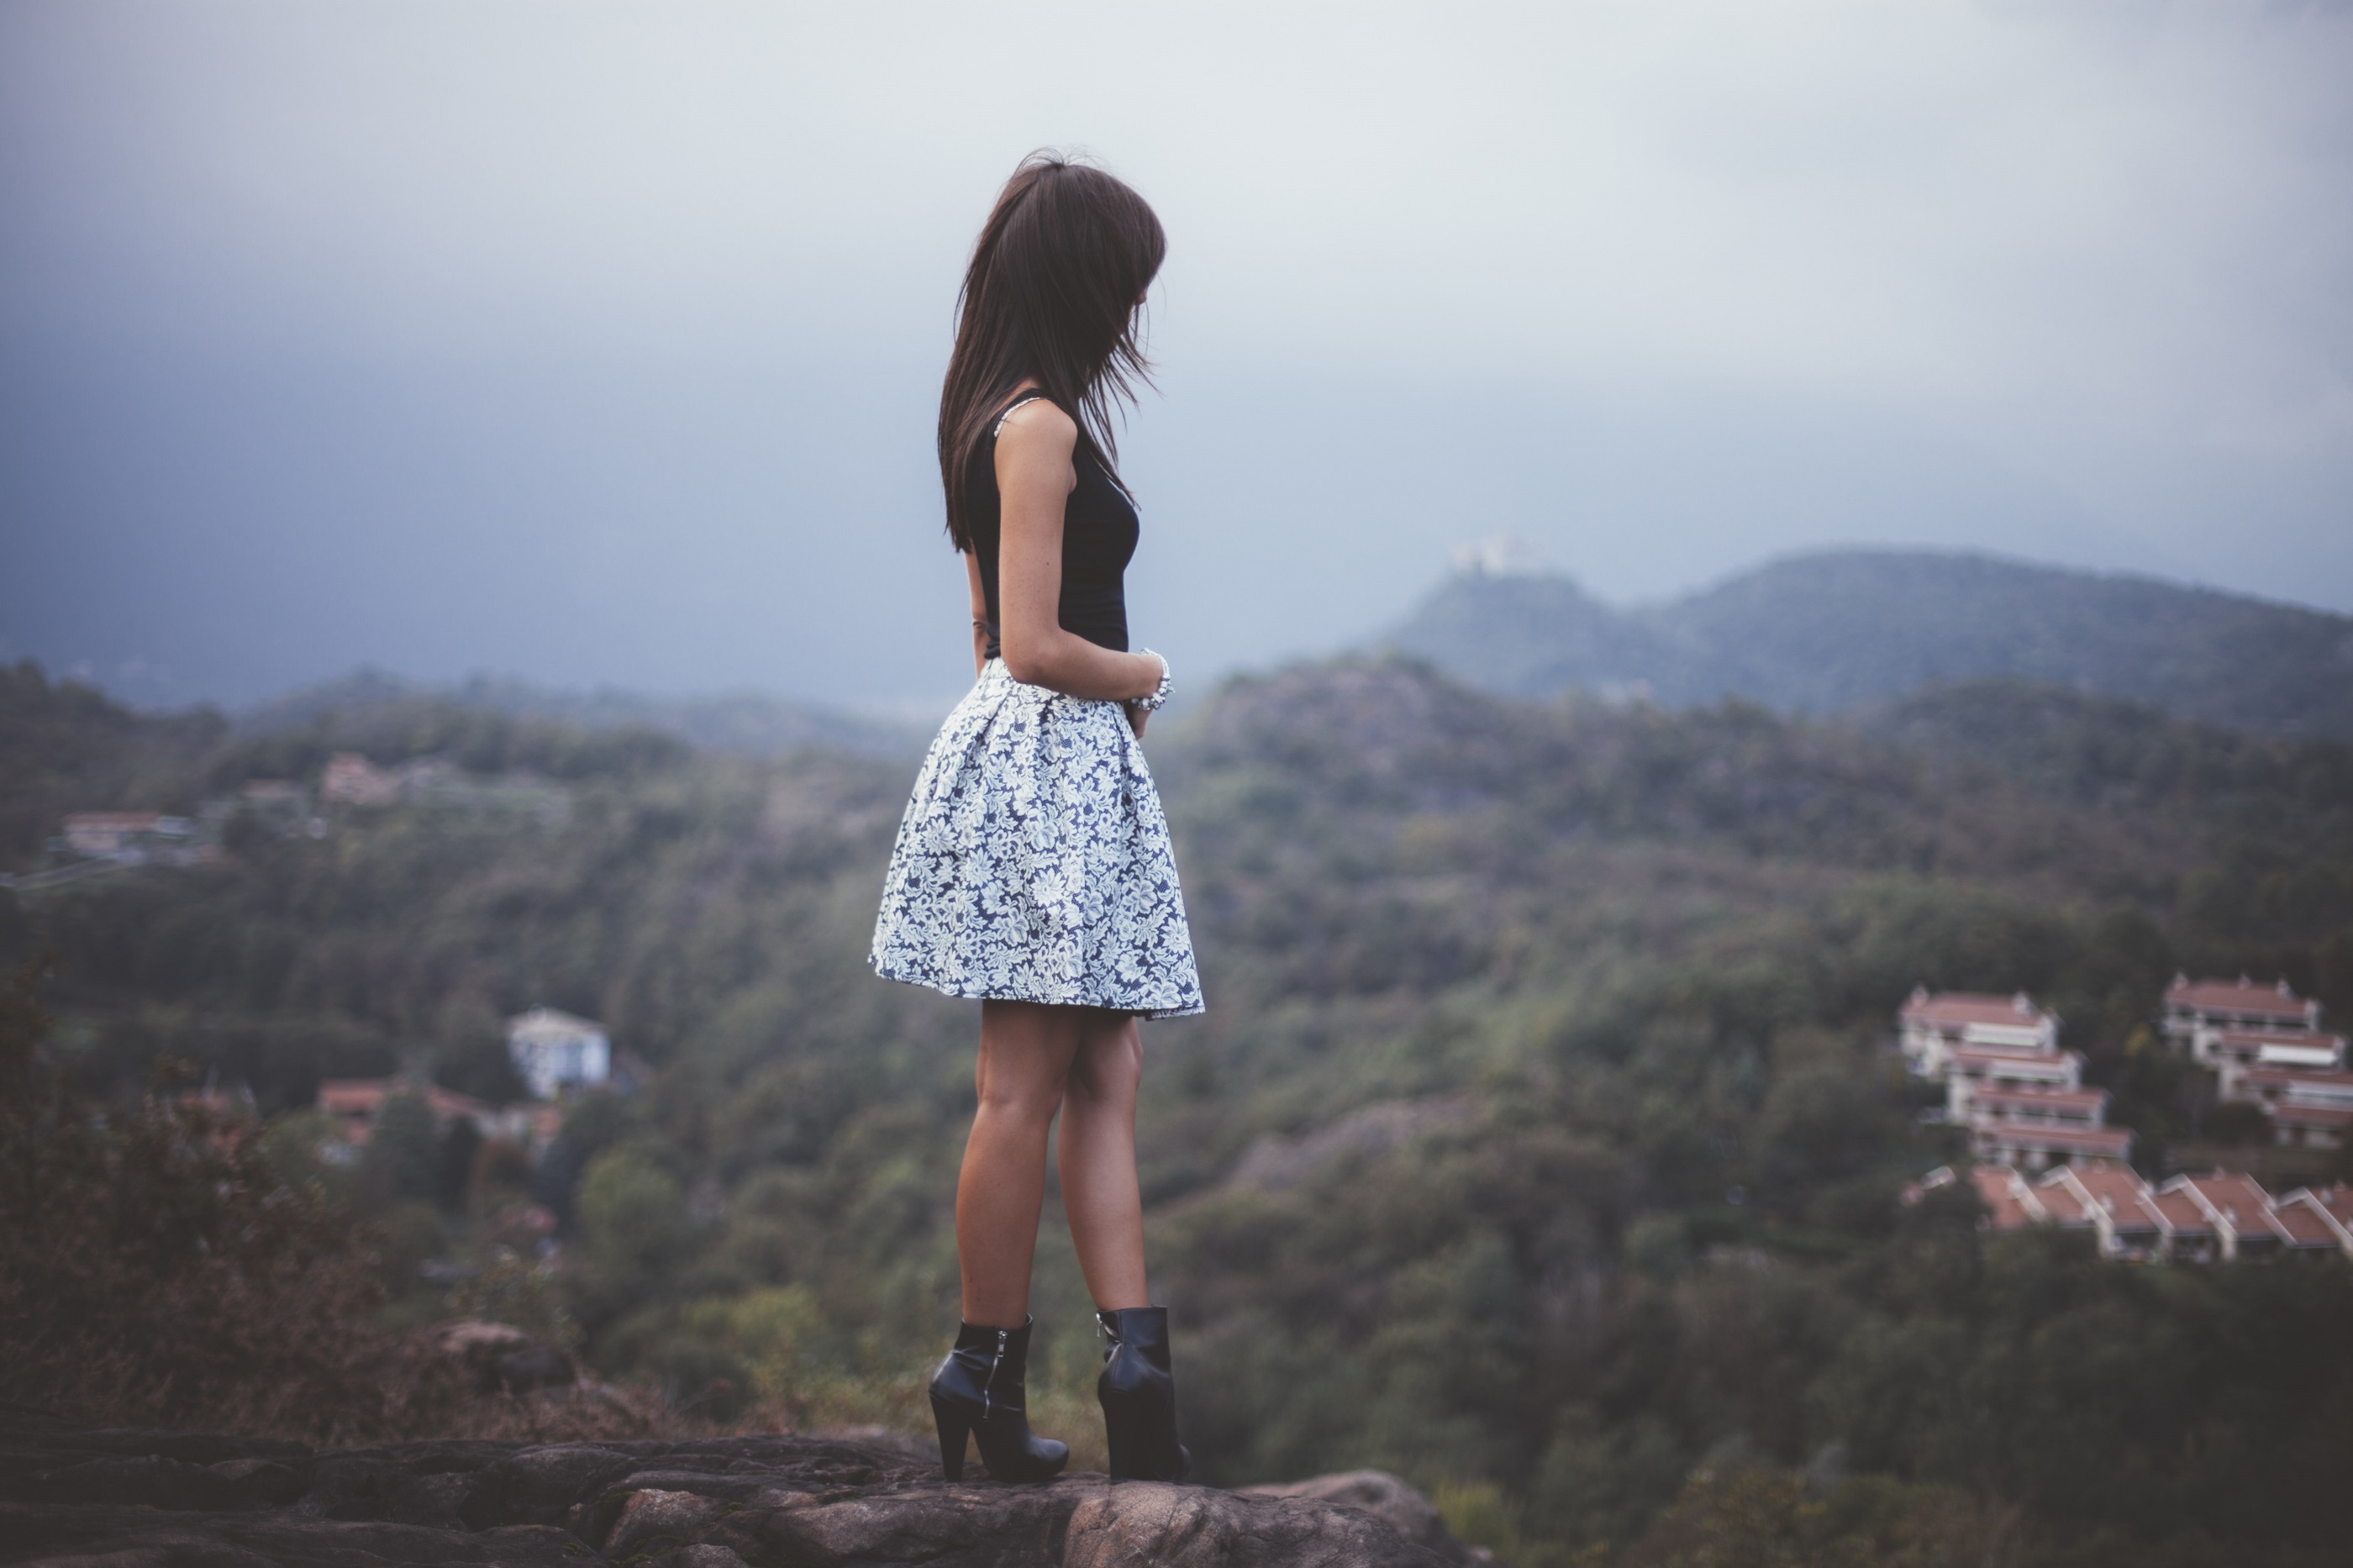 Model Observing, Activity, Girl, Hill, Human, HQ Photo